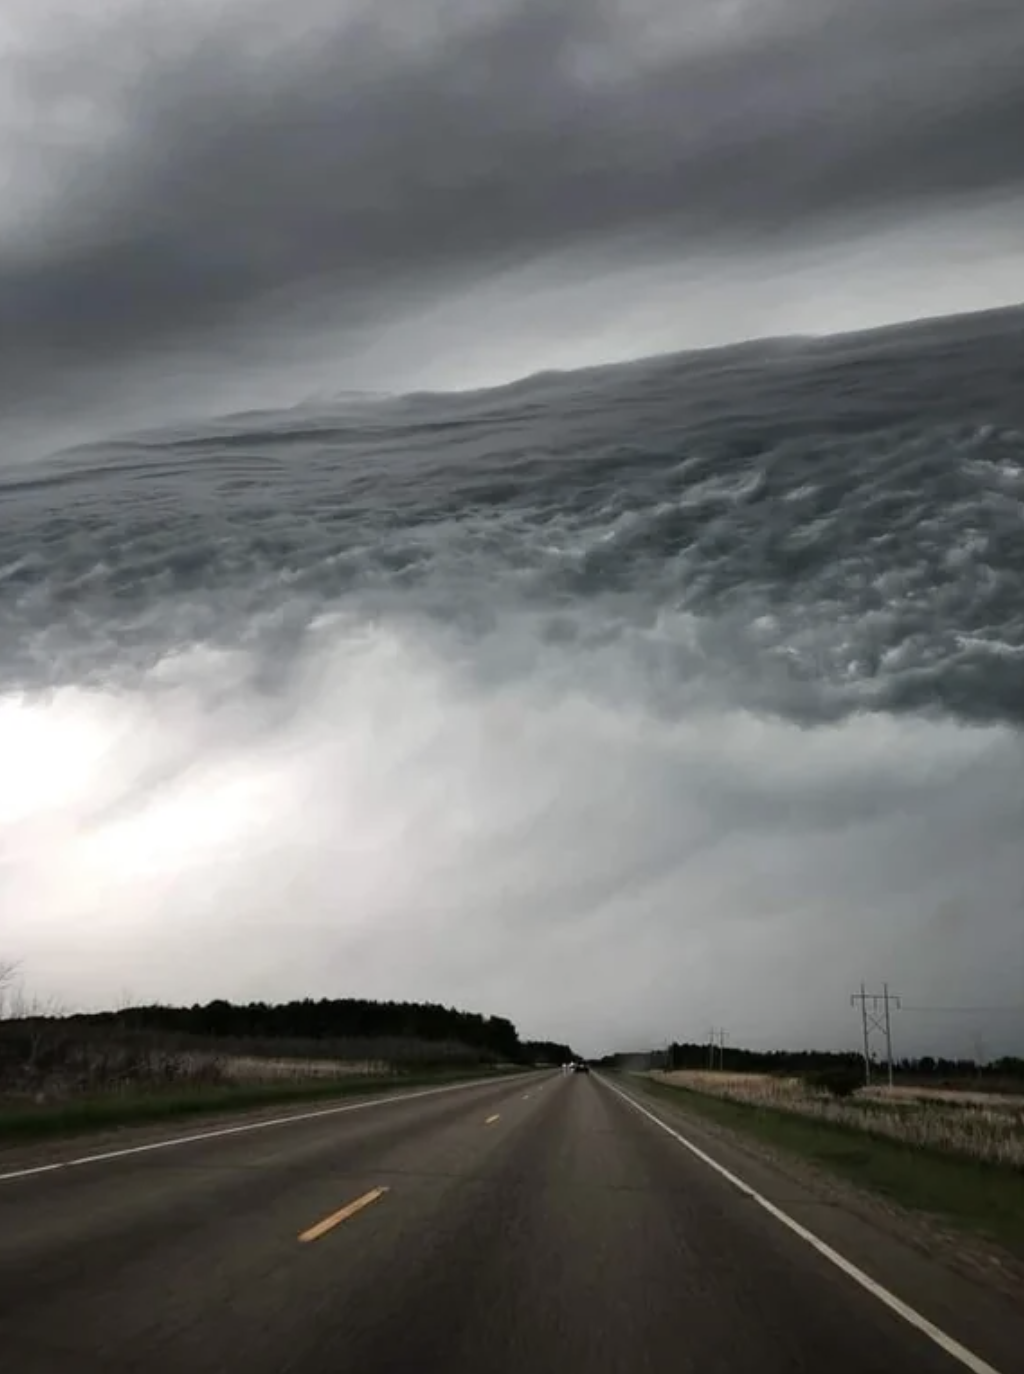 A Minnesota woman recently captured a cloud formation that appeared to look like an ocean in the sky